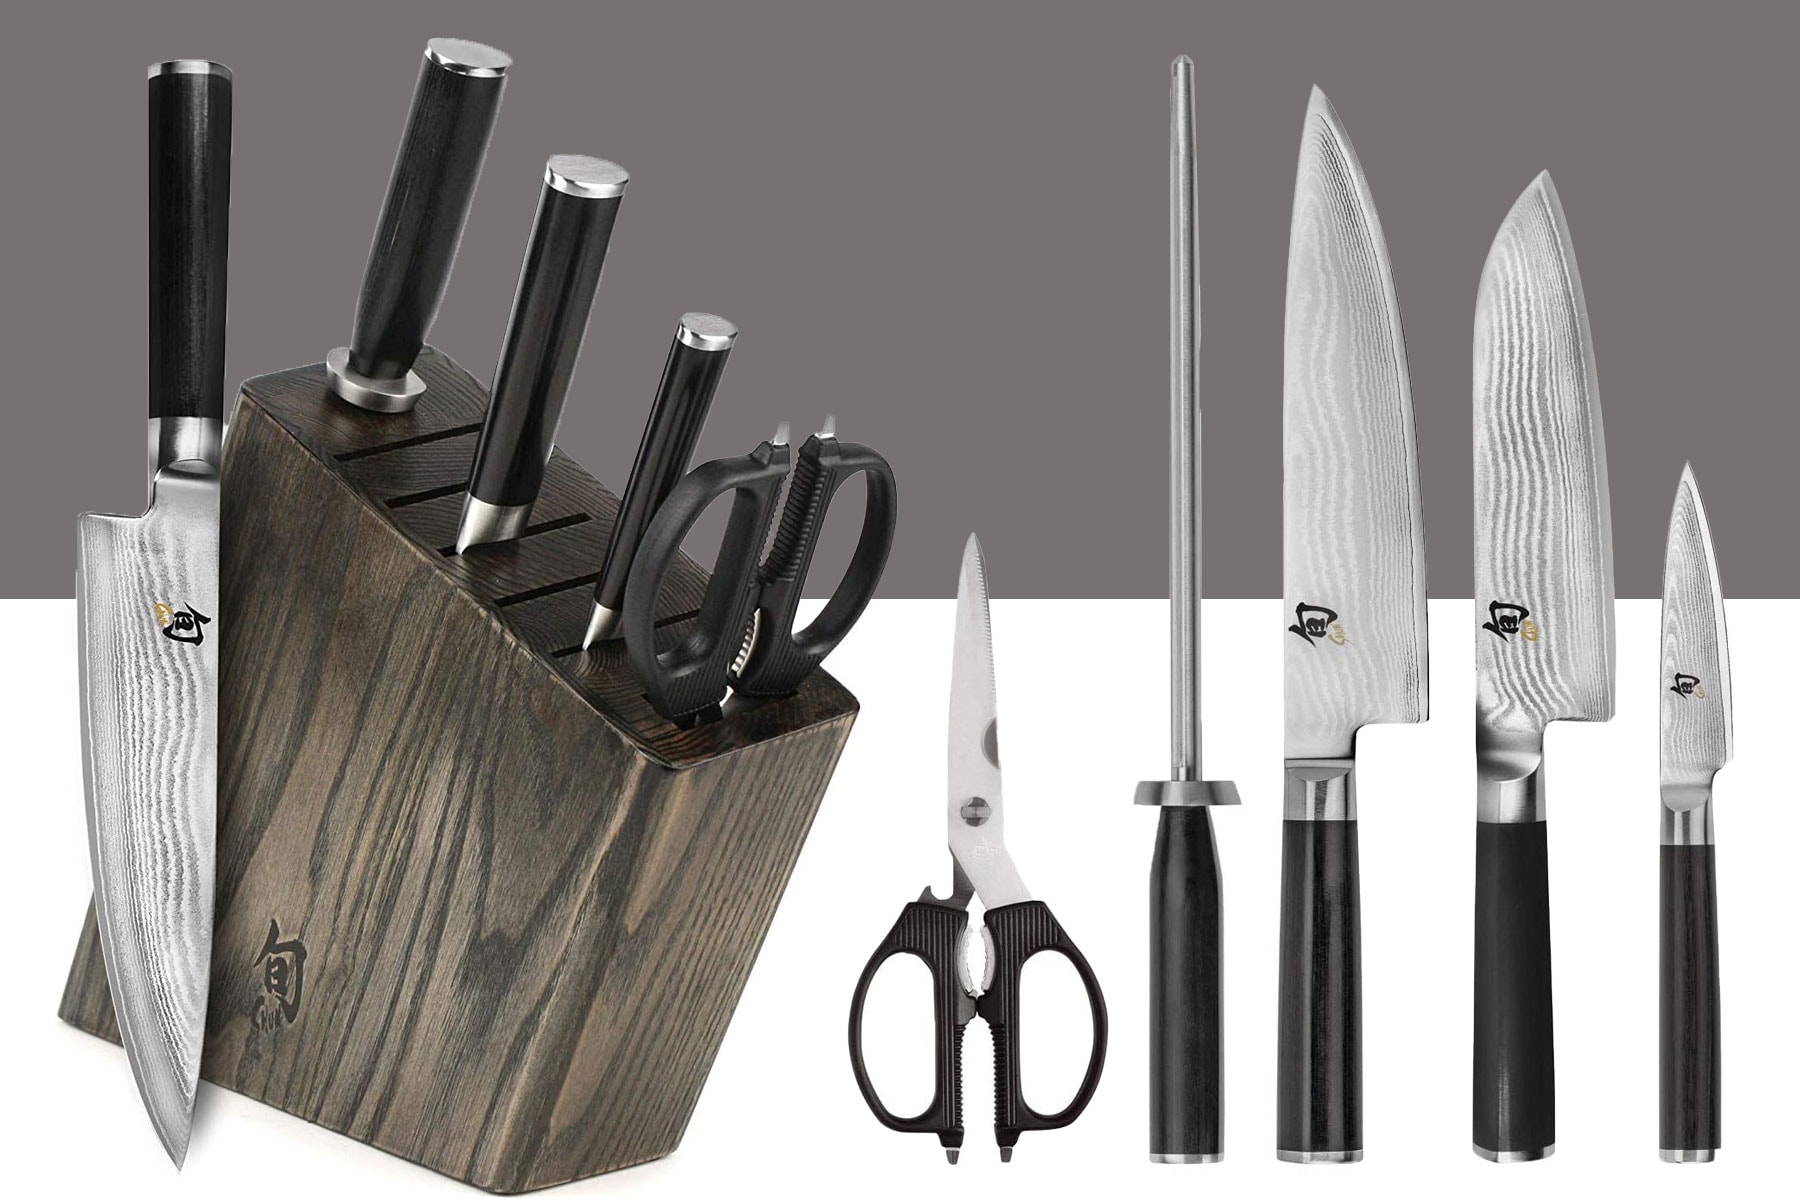 The Shun Classic 6-piece Japanese knife set shown with the knives inside the storage block and outside the storage block. 